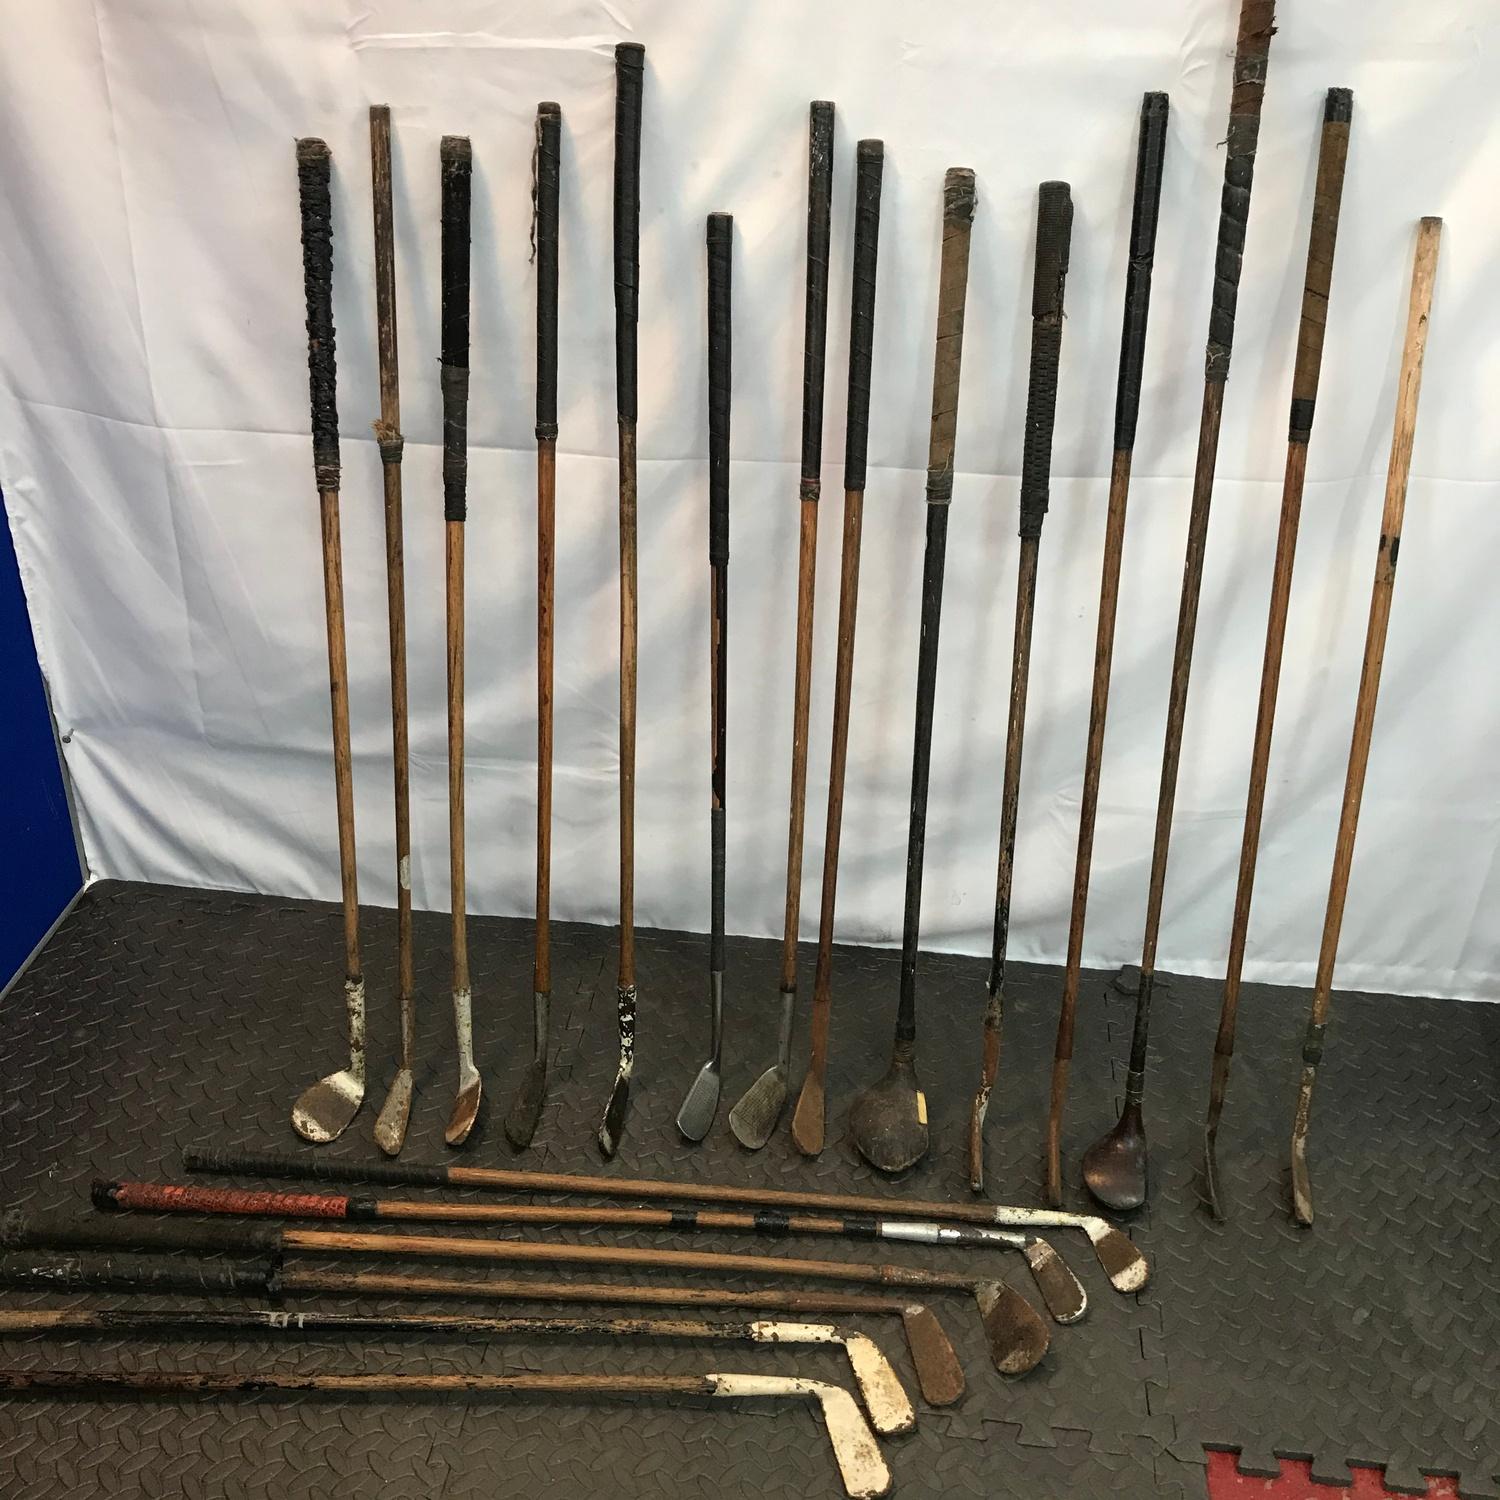 A Large collection of vintage Hickory Shaft golf clubs. Includes makes such as J.G.SMITH, Cann &